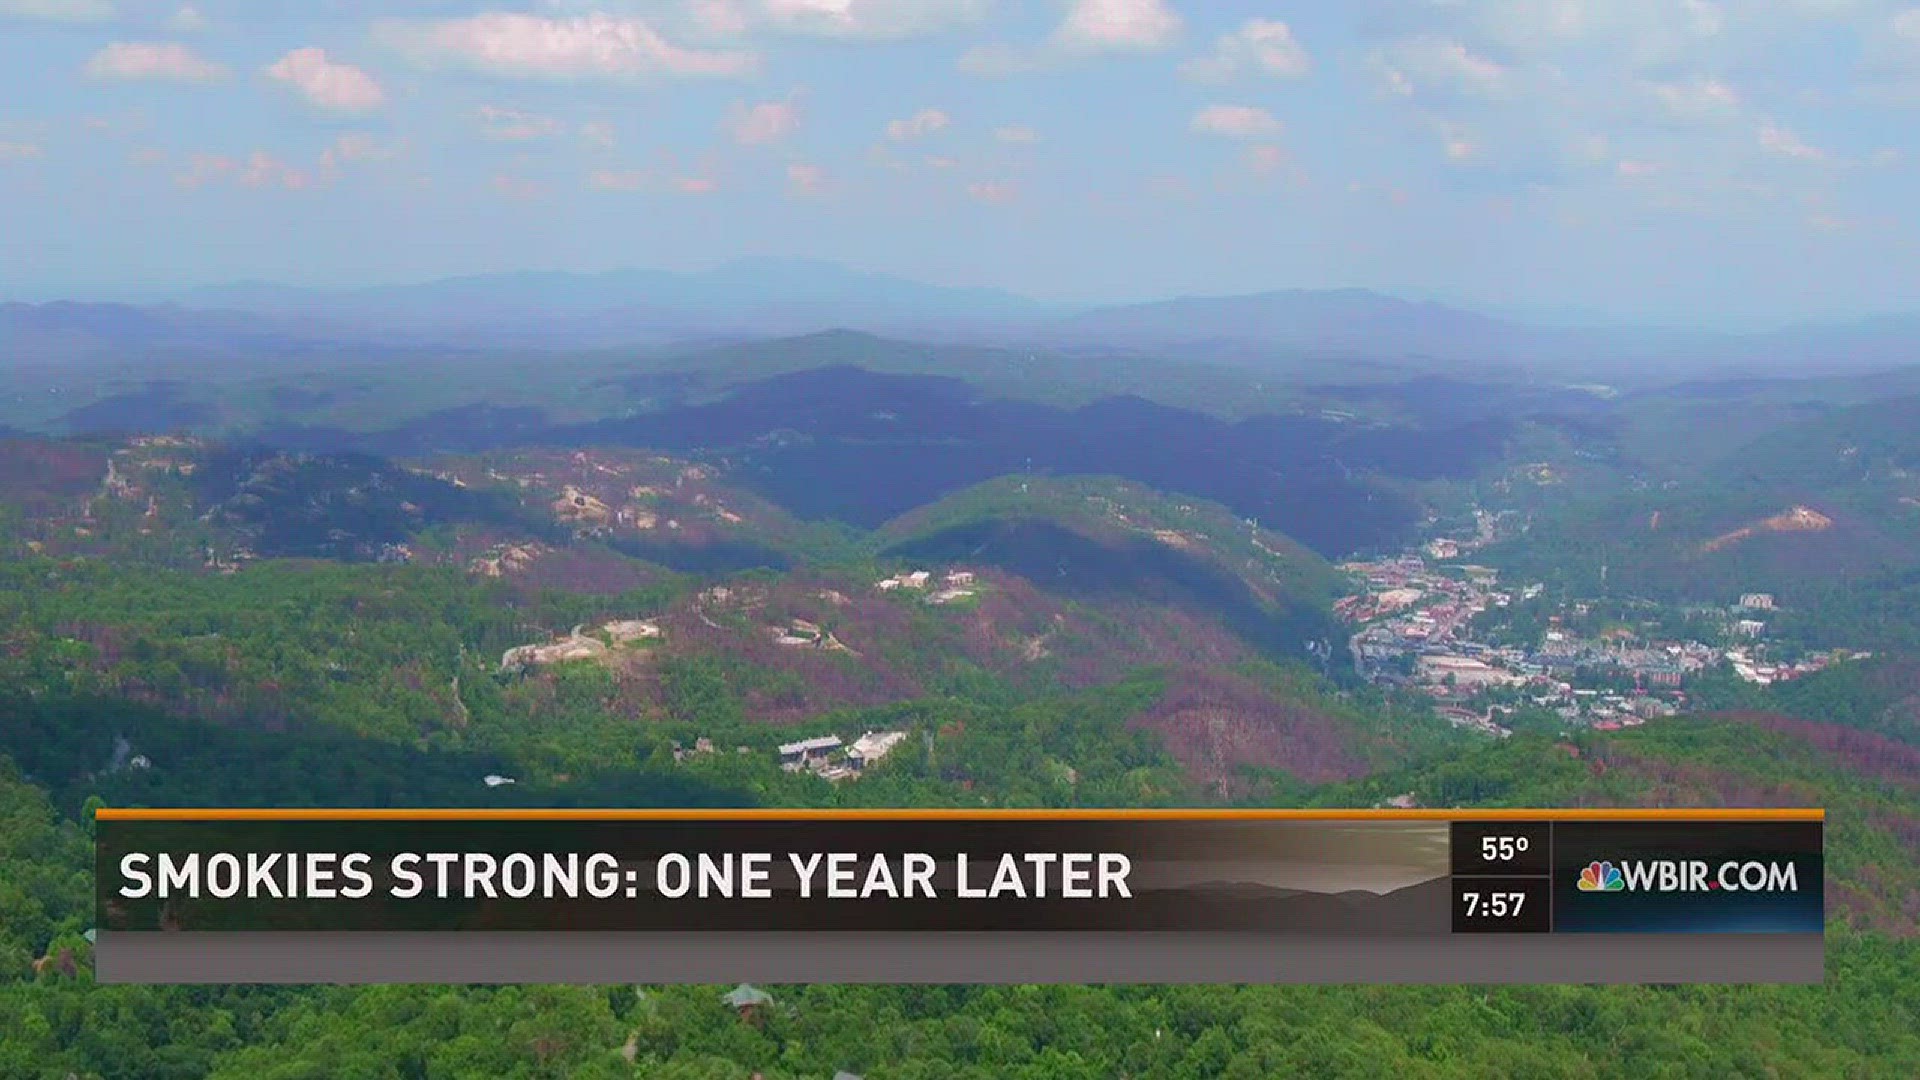 On Tuesday, November 28, 2017, we remember one year after the deadly Sevier County wildfires. We take a look at what it means to be Smokies Strong.